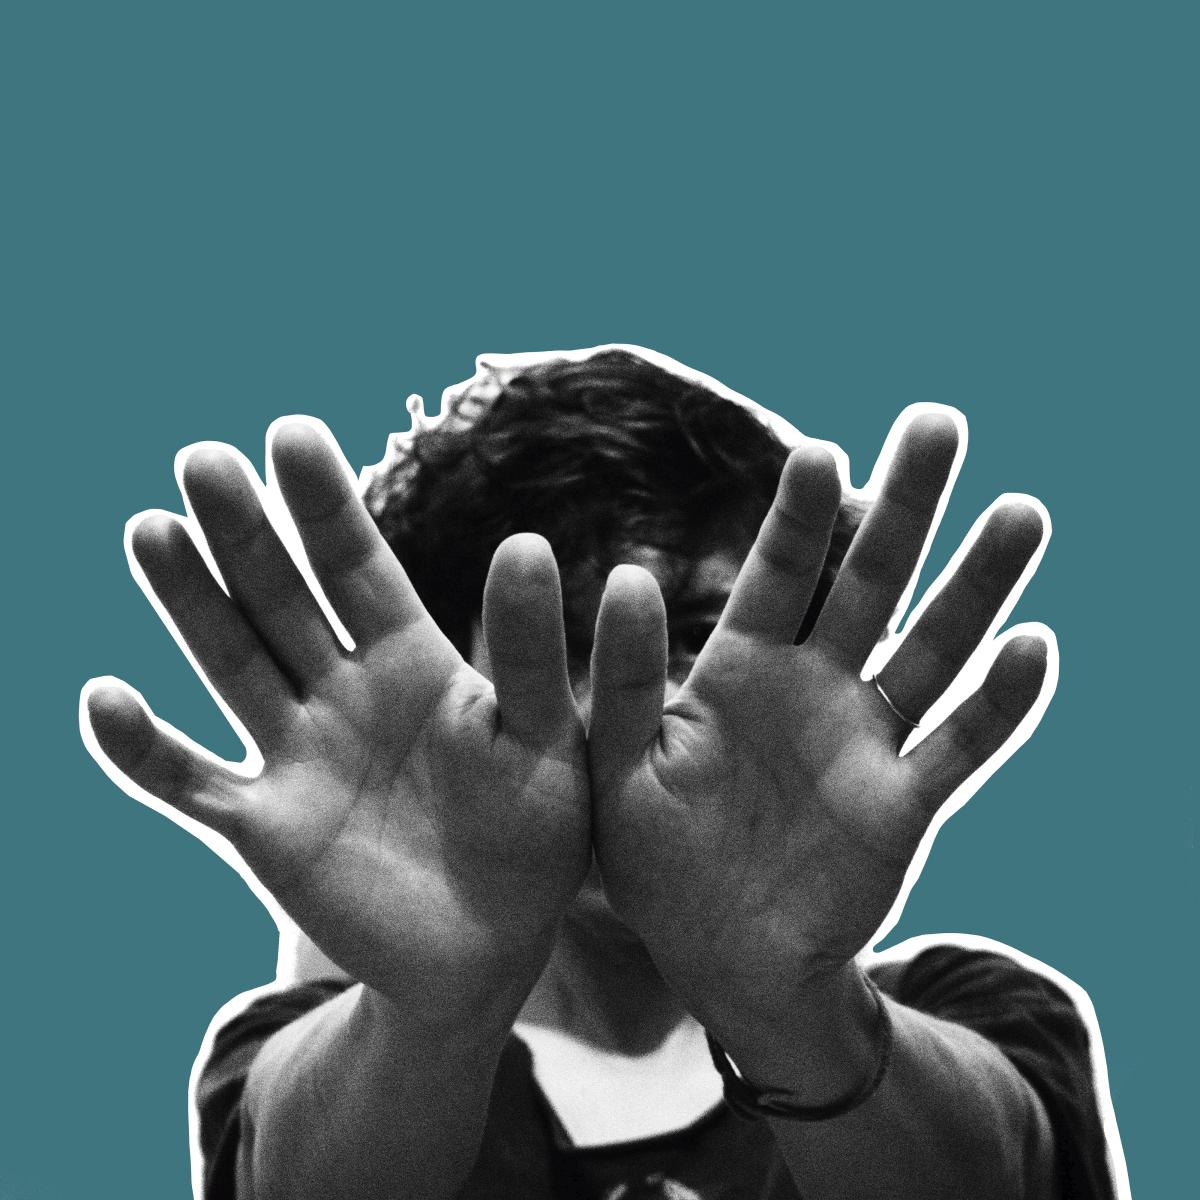 Tune-Yards | I can feel you creep into my private life | CD